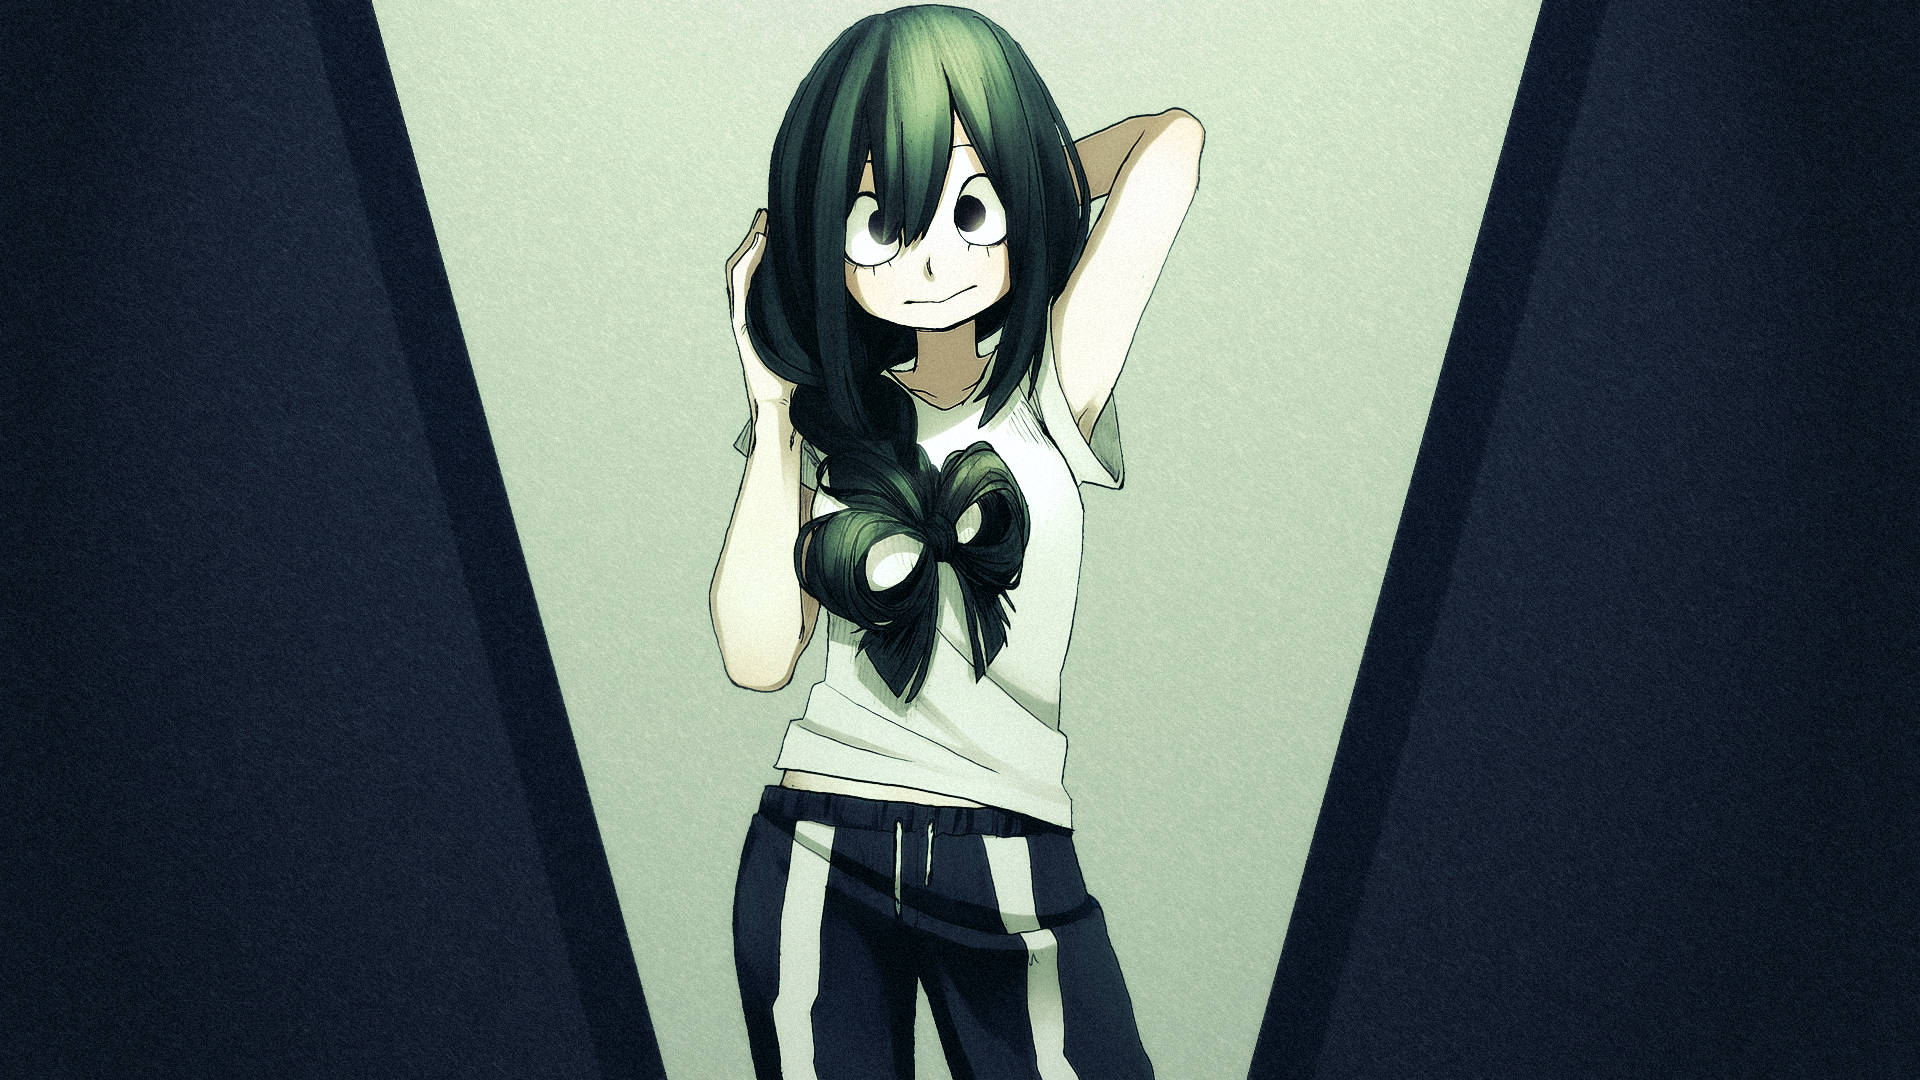 Anime Character Froppy Mid-action Wallpaper